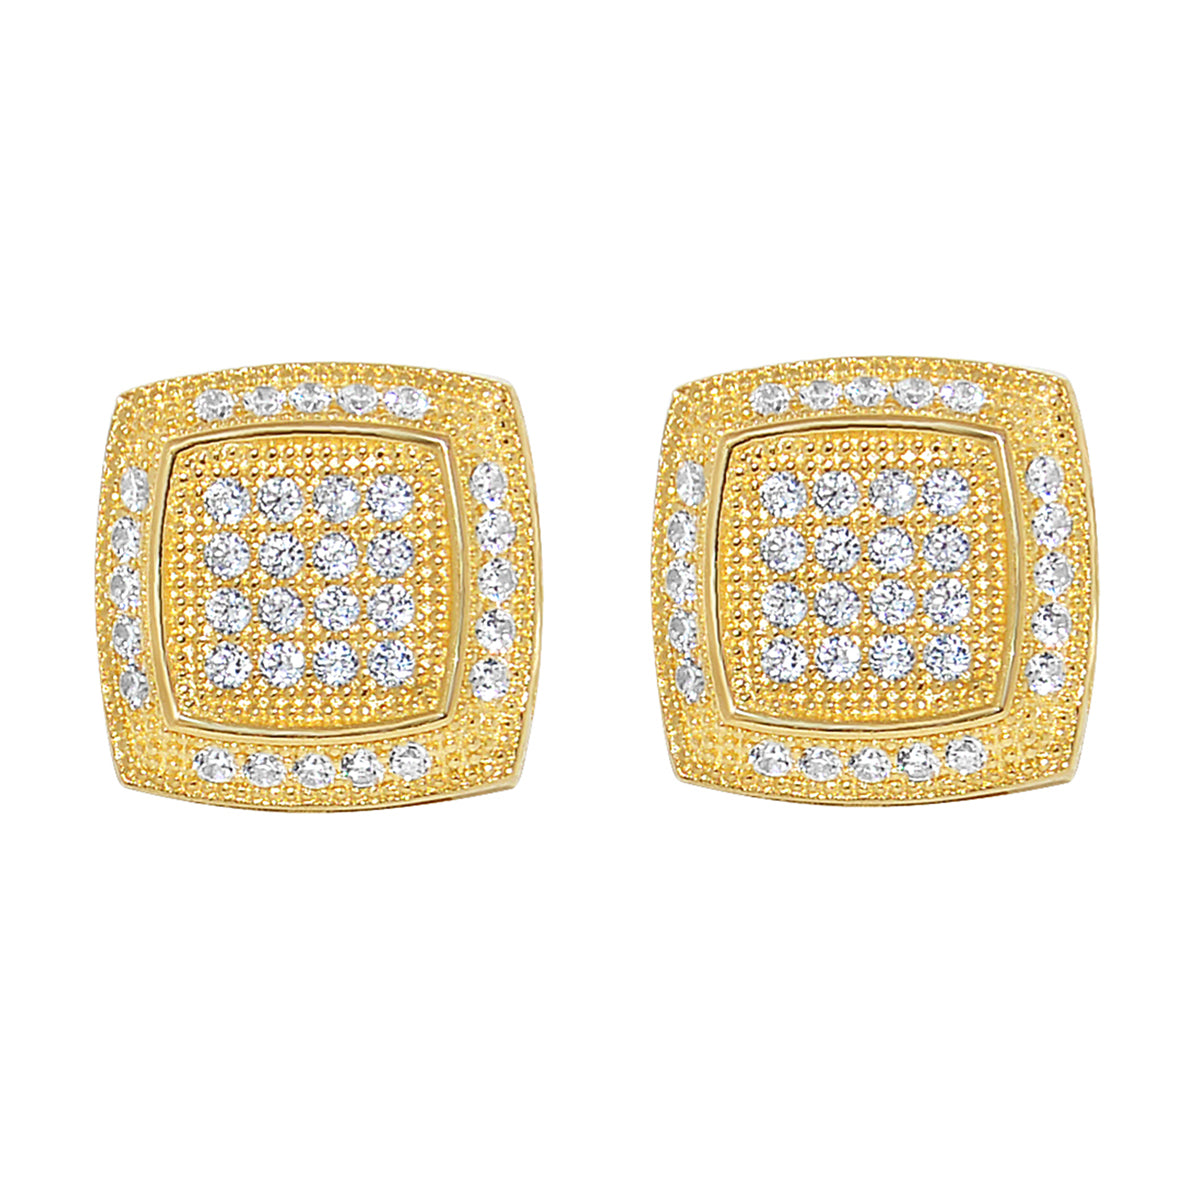 14k Yellow Gold 10mm Pave'-set Cubic Zirconia Square Stud Earrings